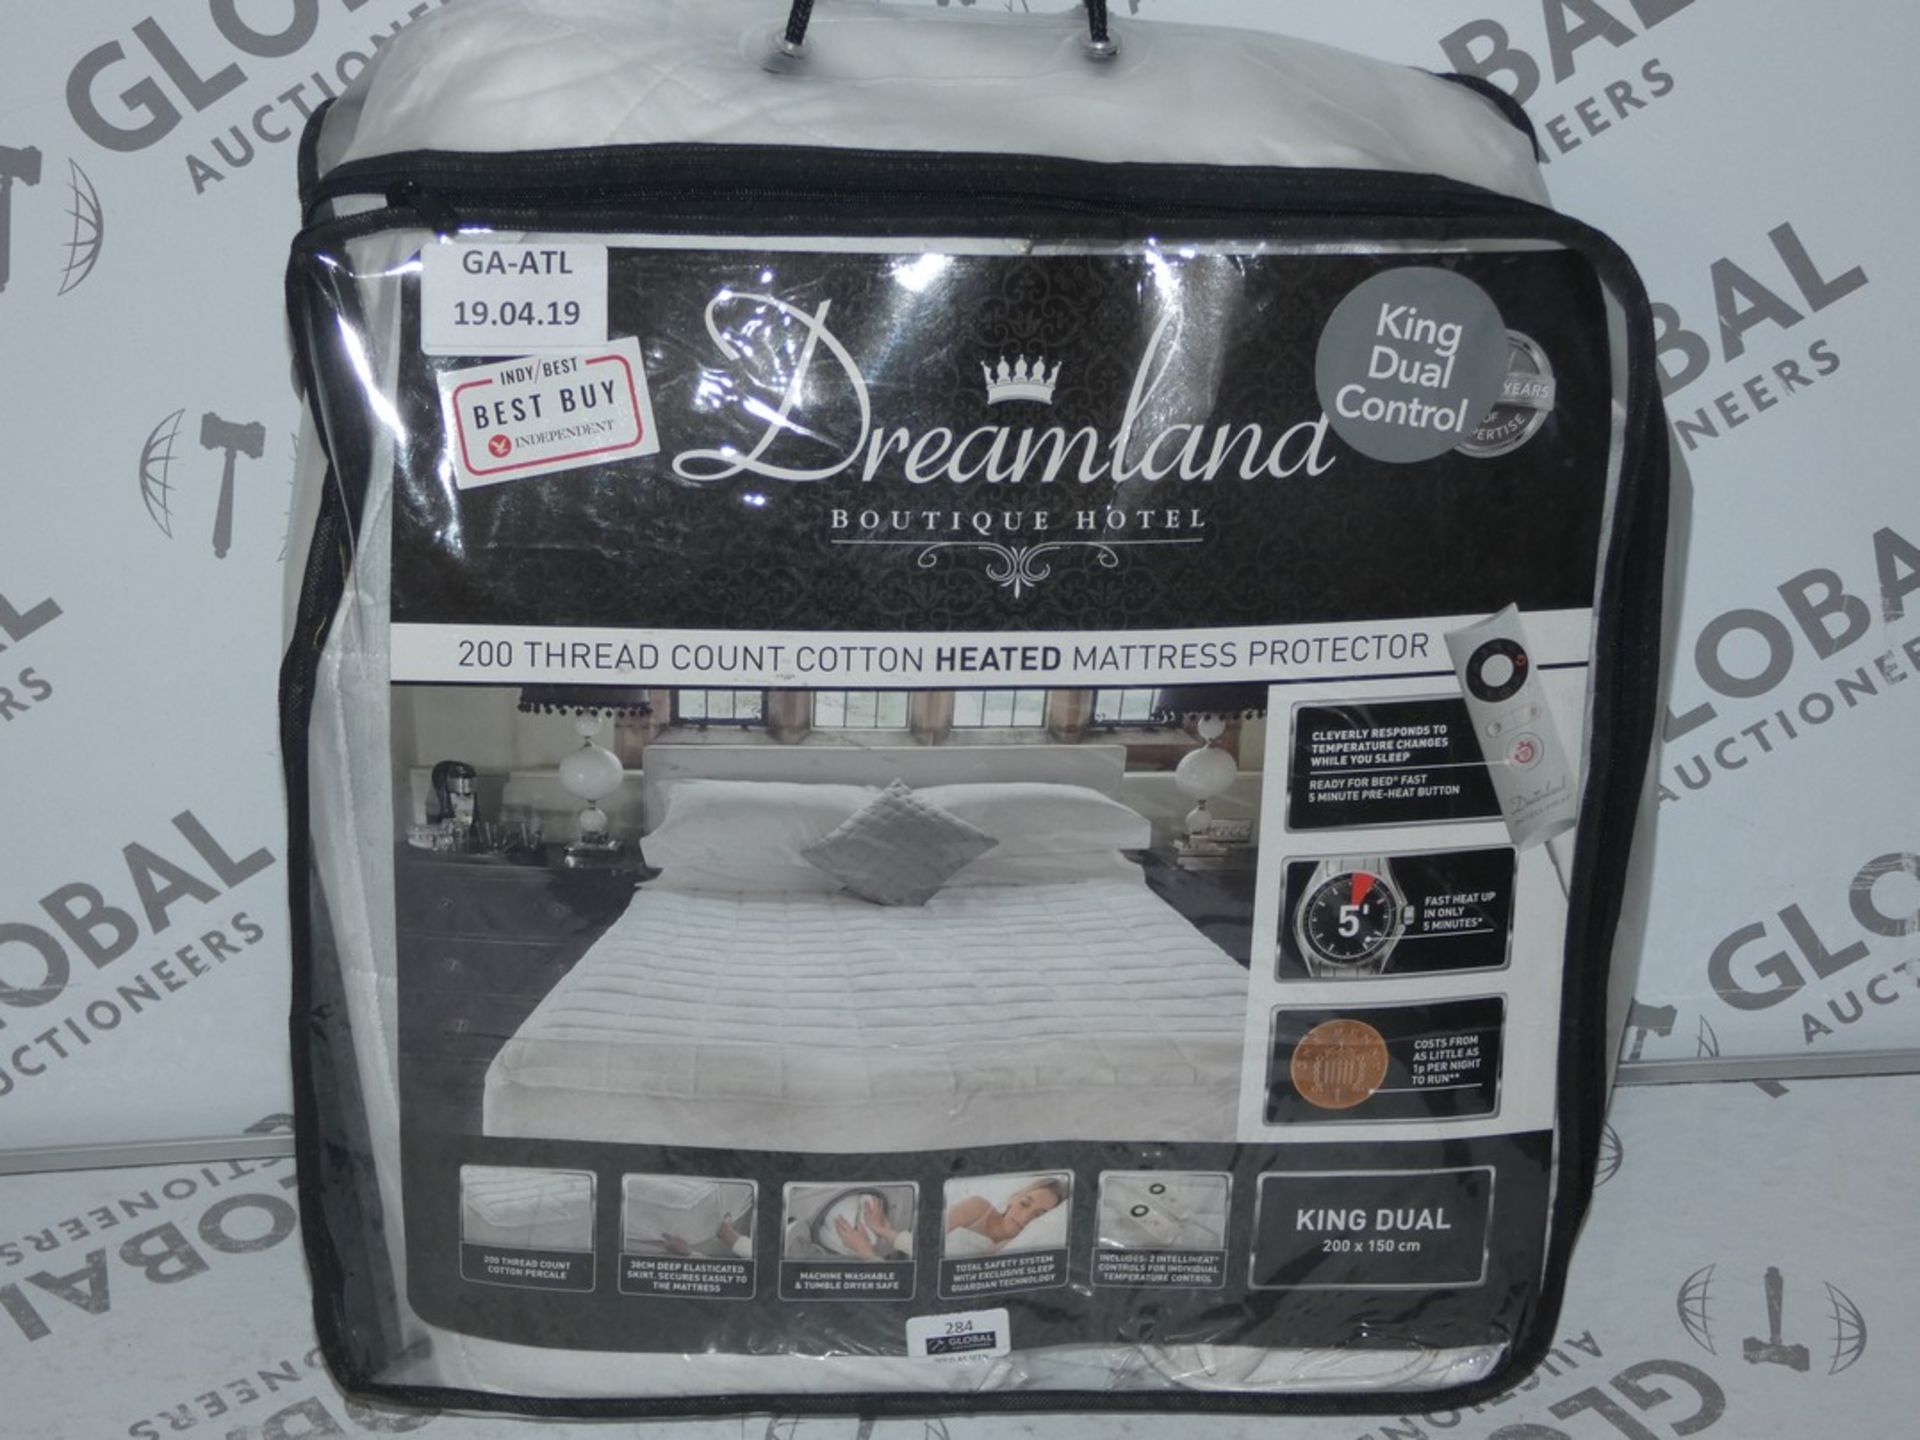 Lot to Contain 2 Bagged Dreamland Boutique Hotel 200 Thread Count Cotton Heated Mattress Protector